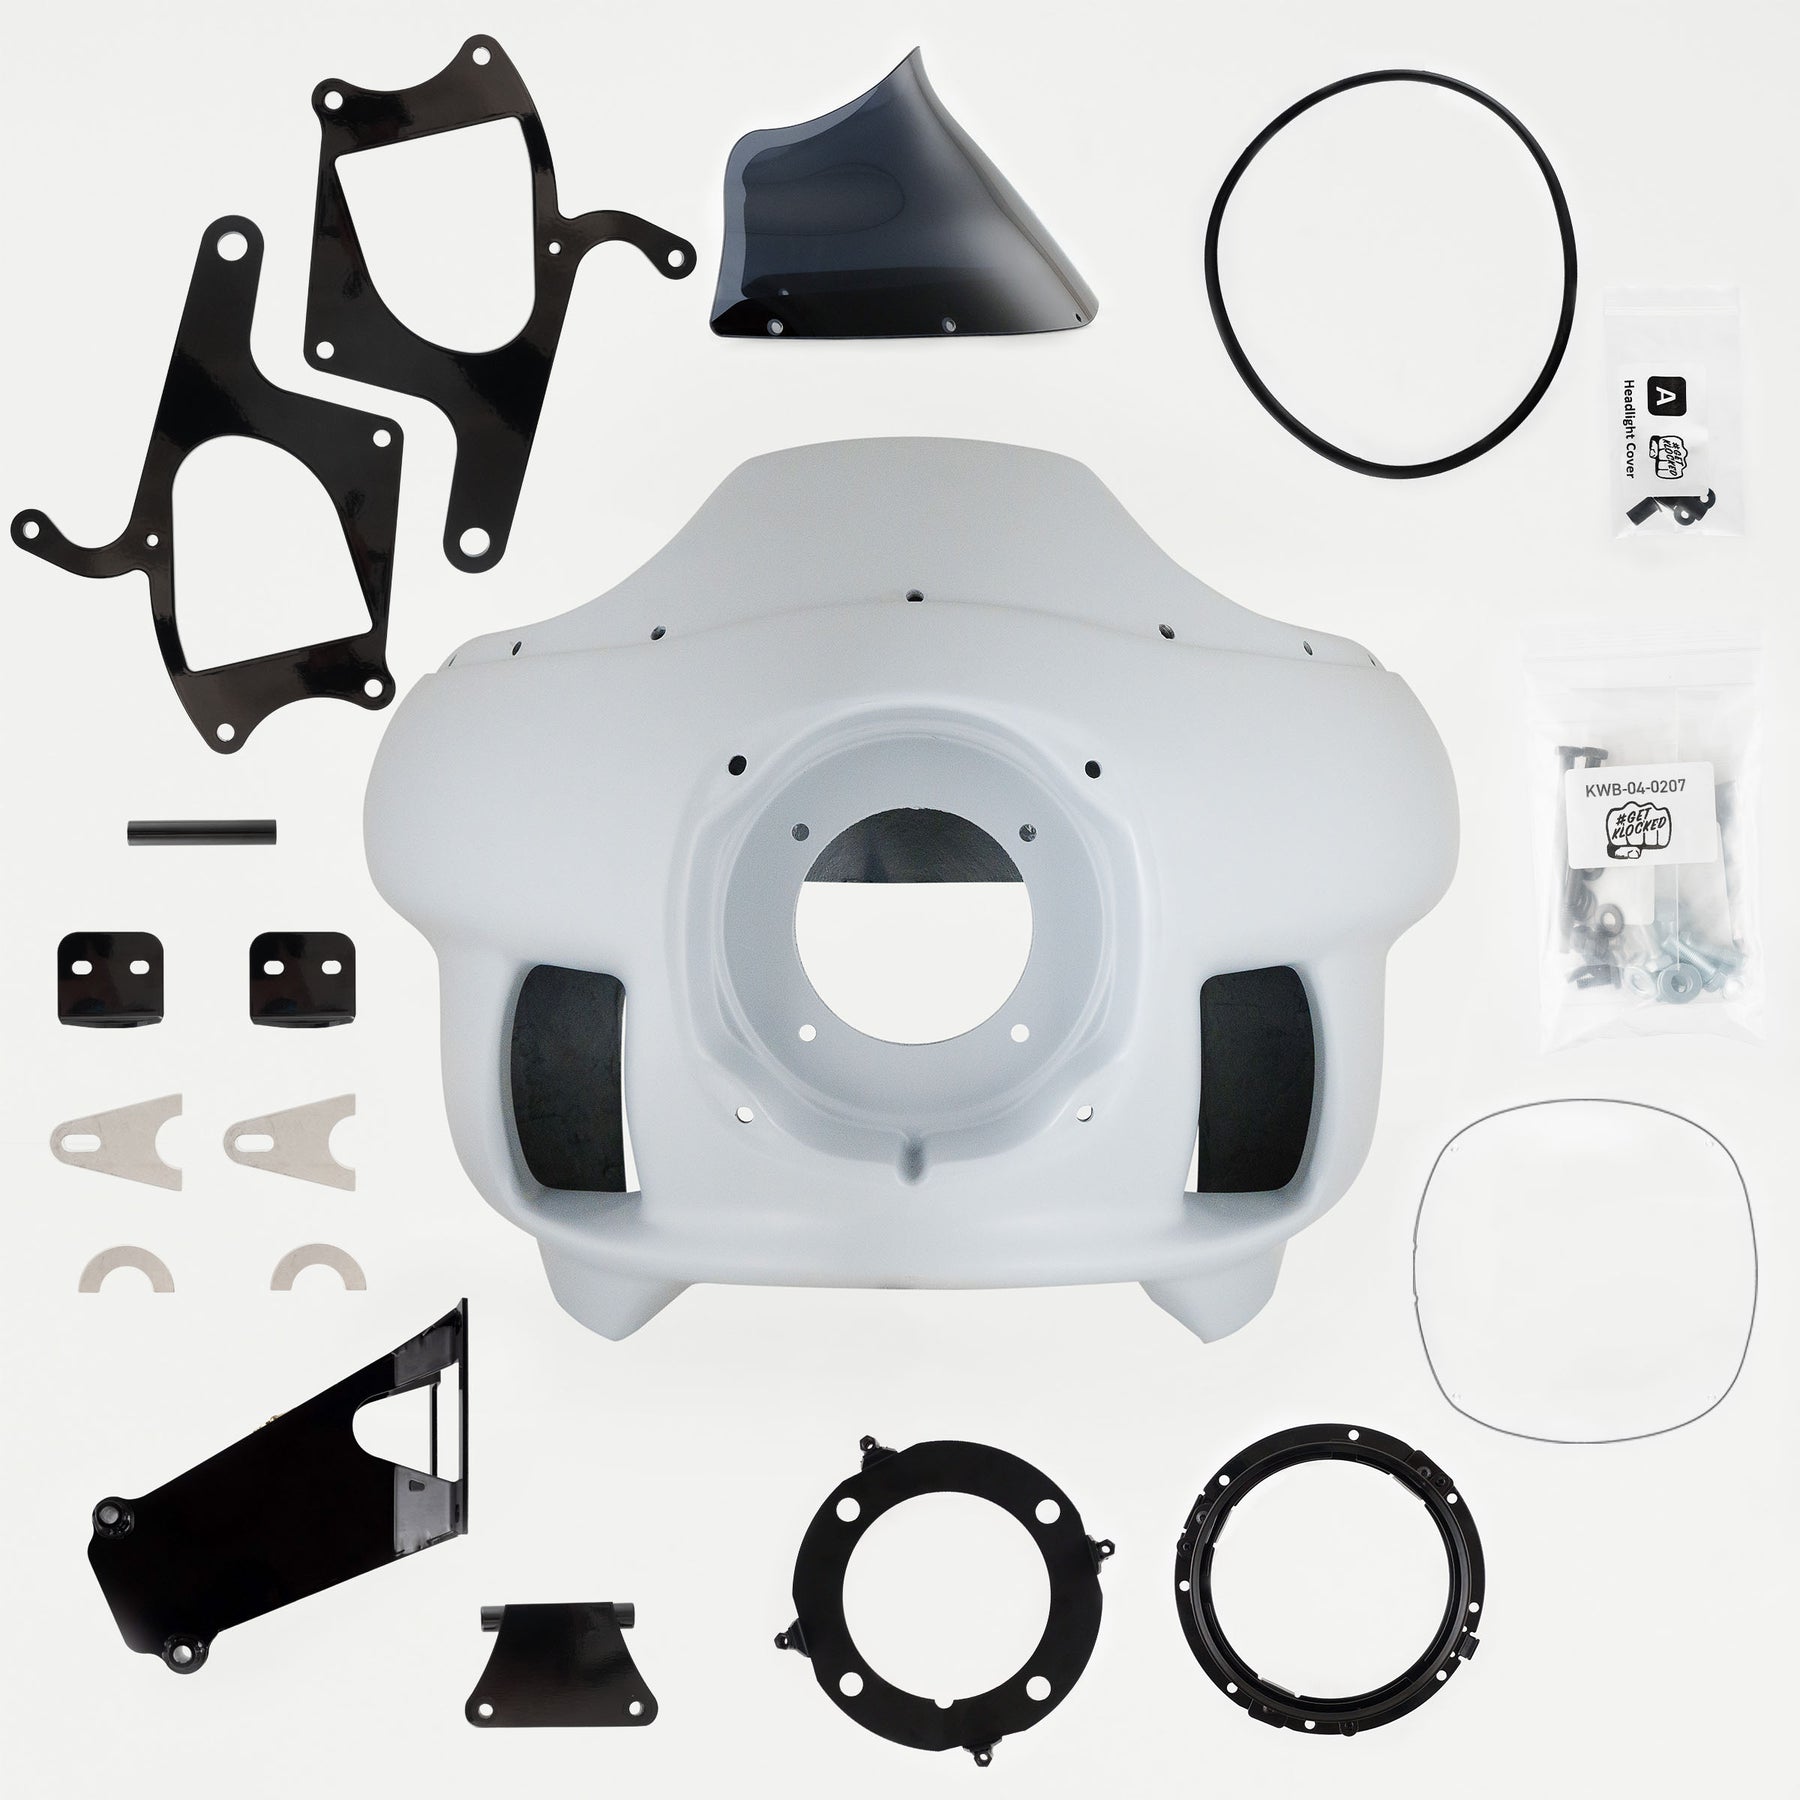 Complete Fit Kit of Harley-Davidson FXRP Fairing Fit Kit for 2016-2023 Indian Springfield Motorcycles 